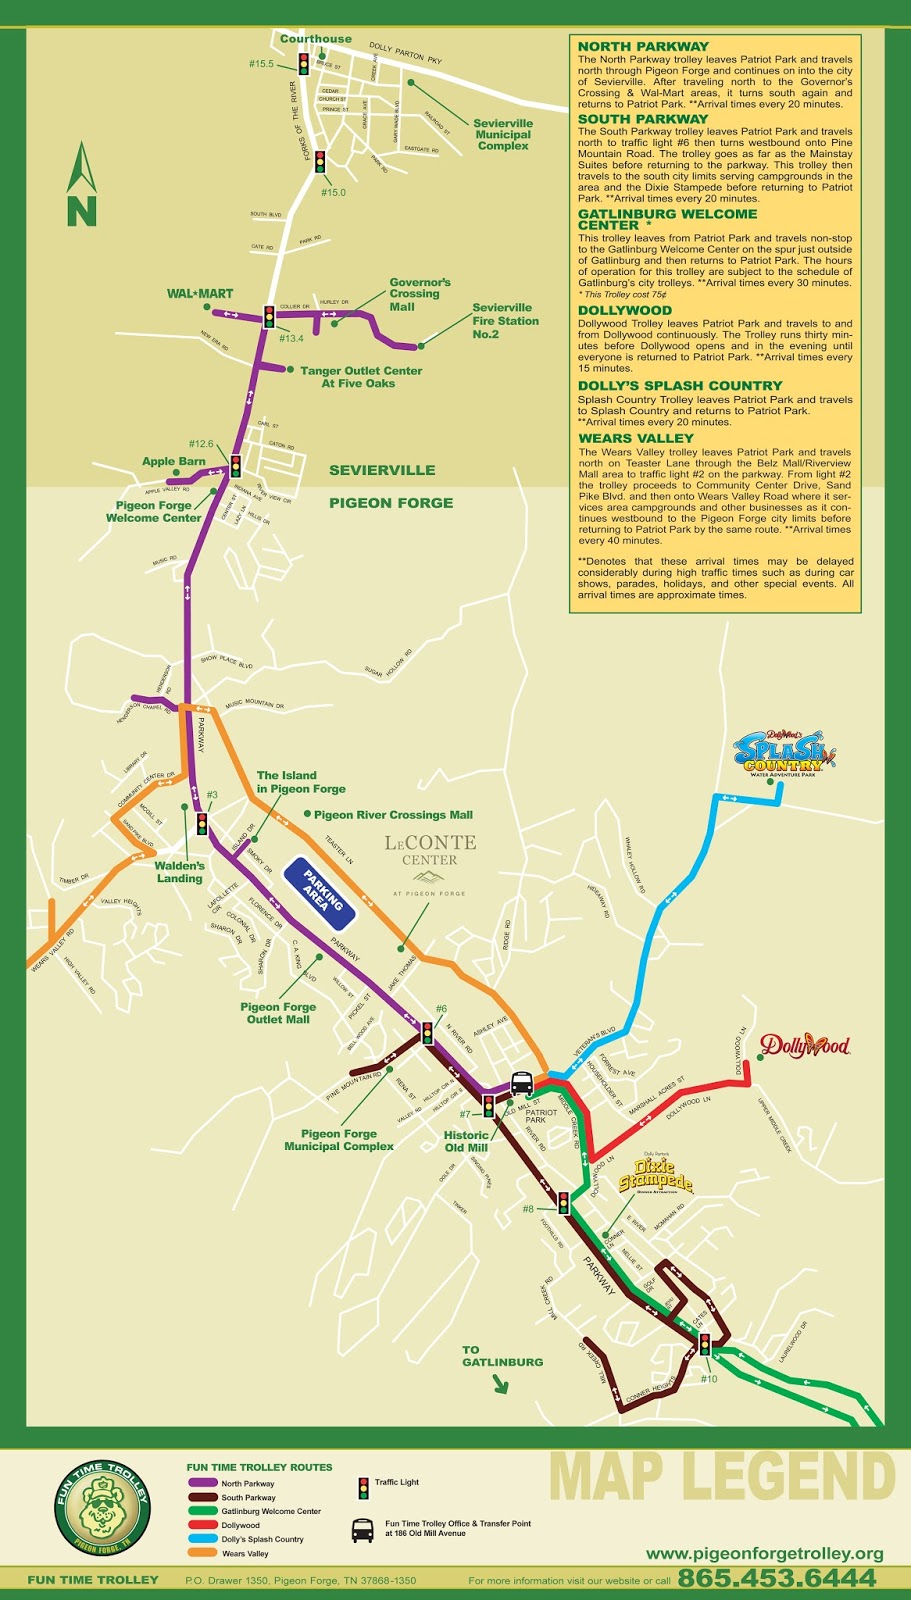 Route Map 